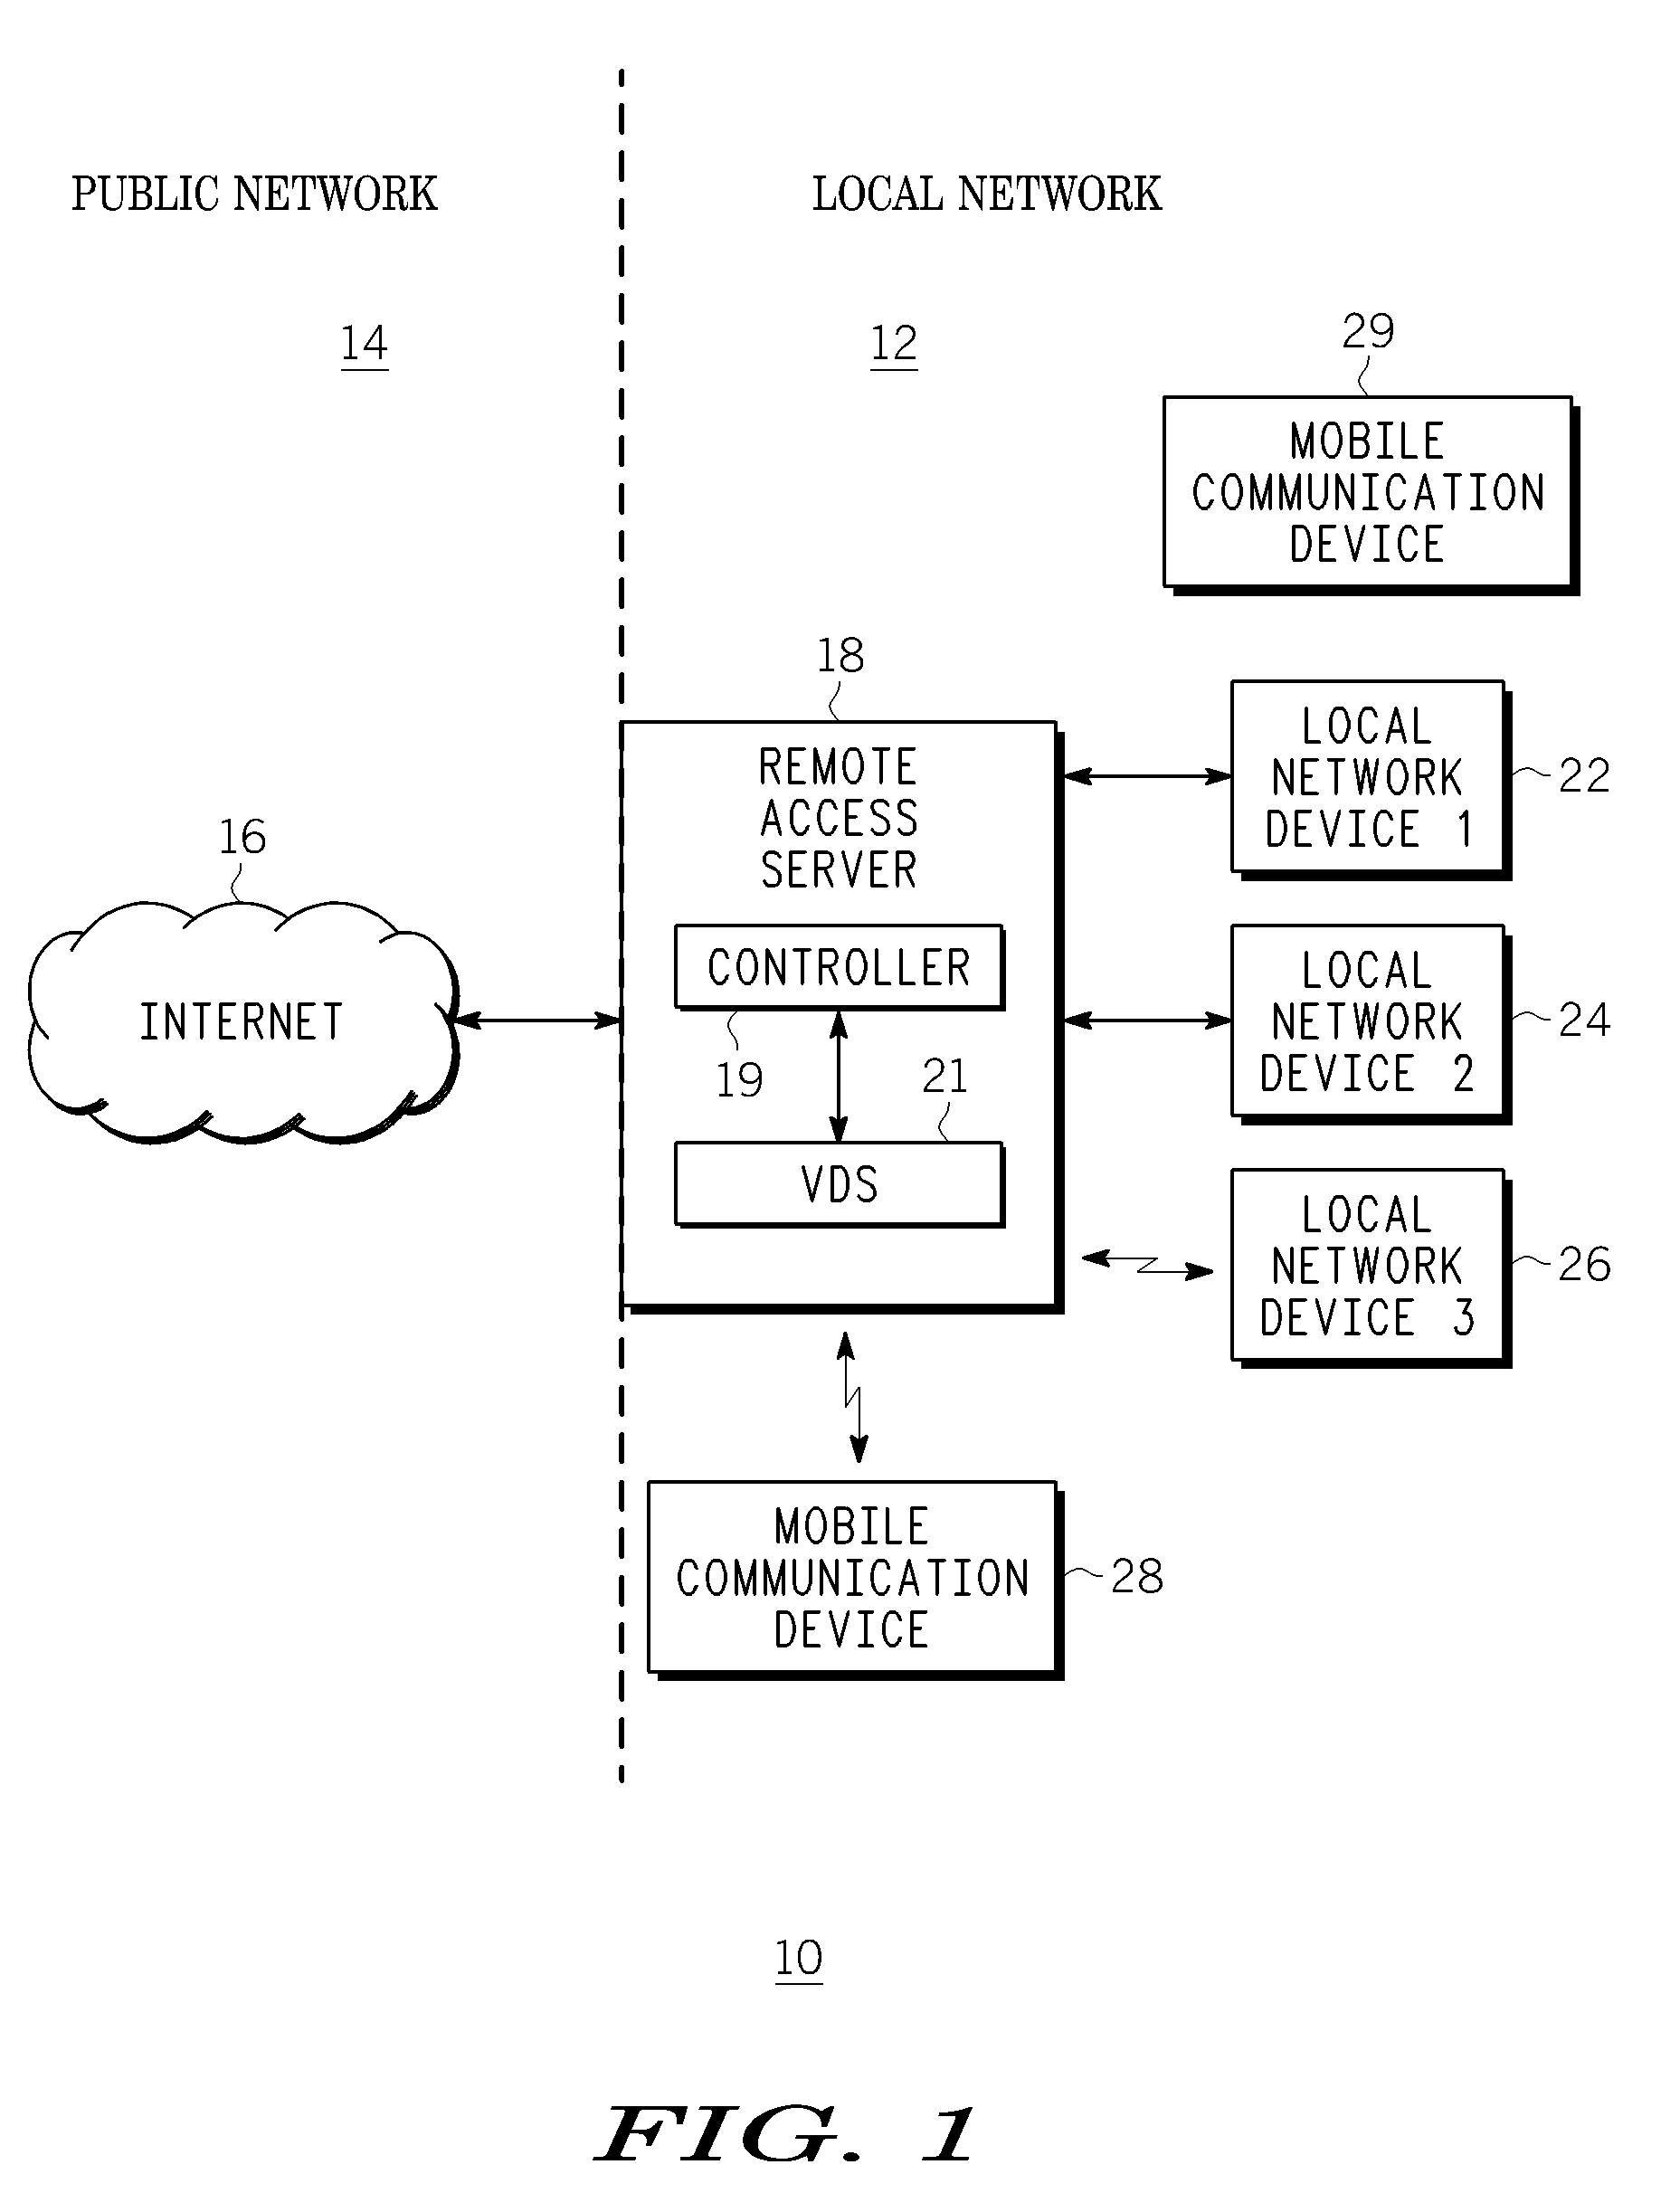 Method, apparatus and system for network mobility of a mobile communication device